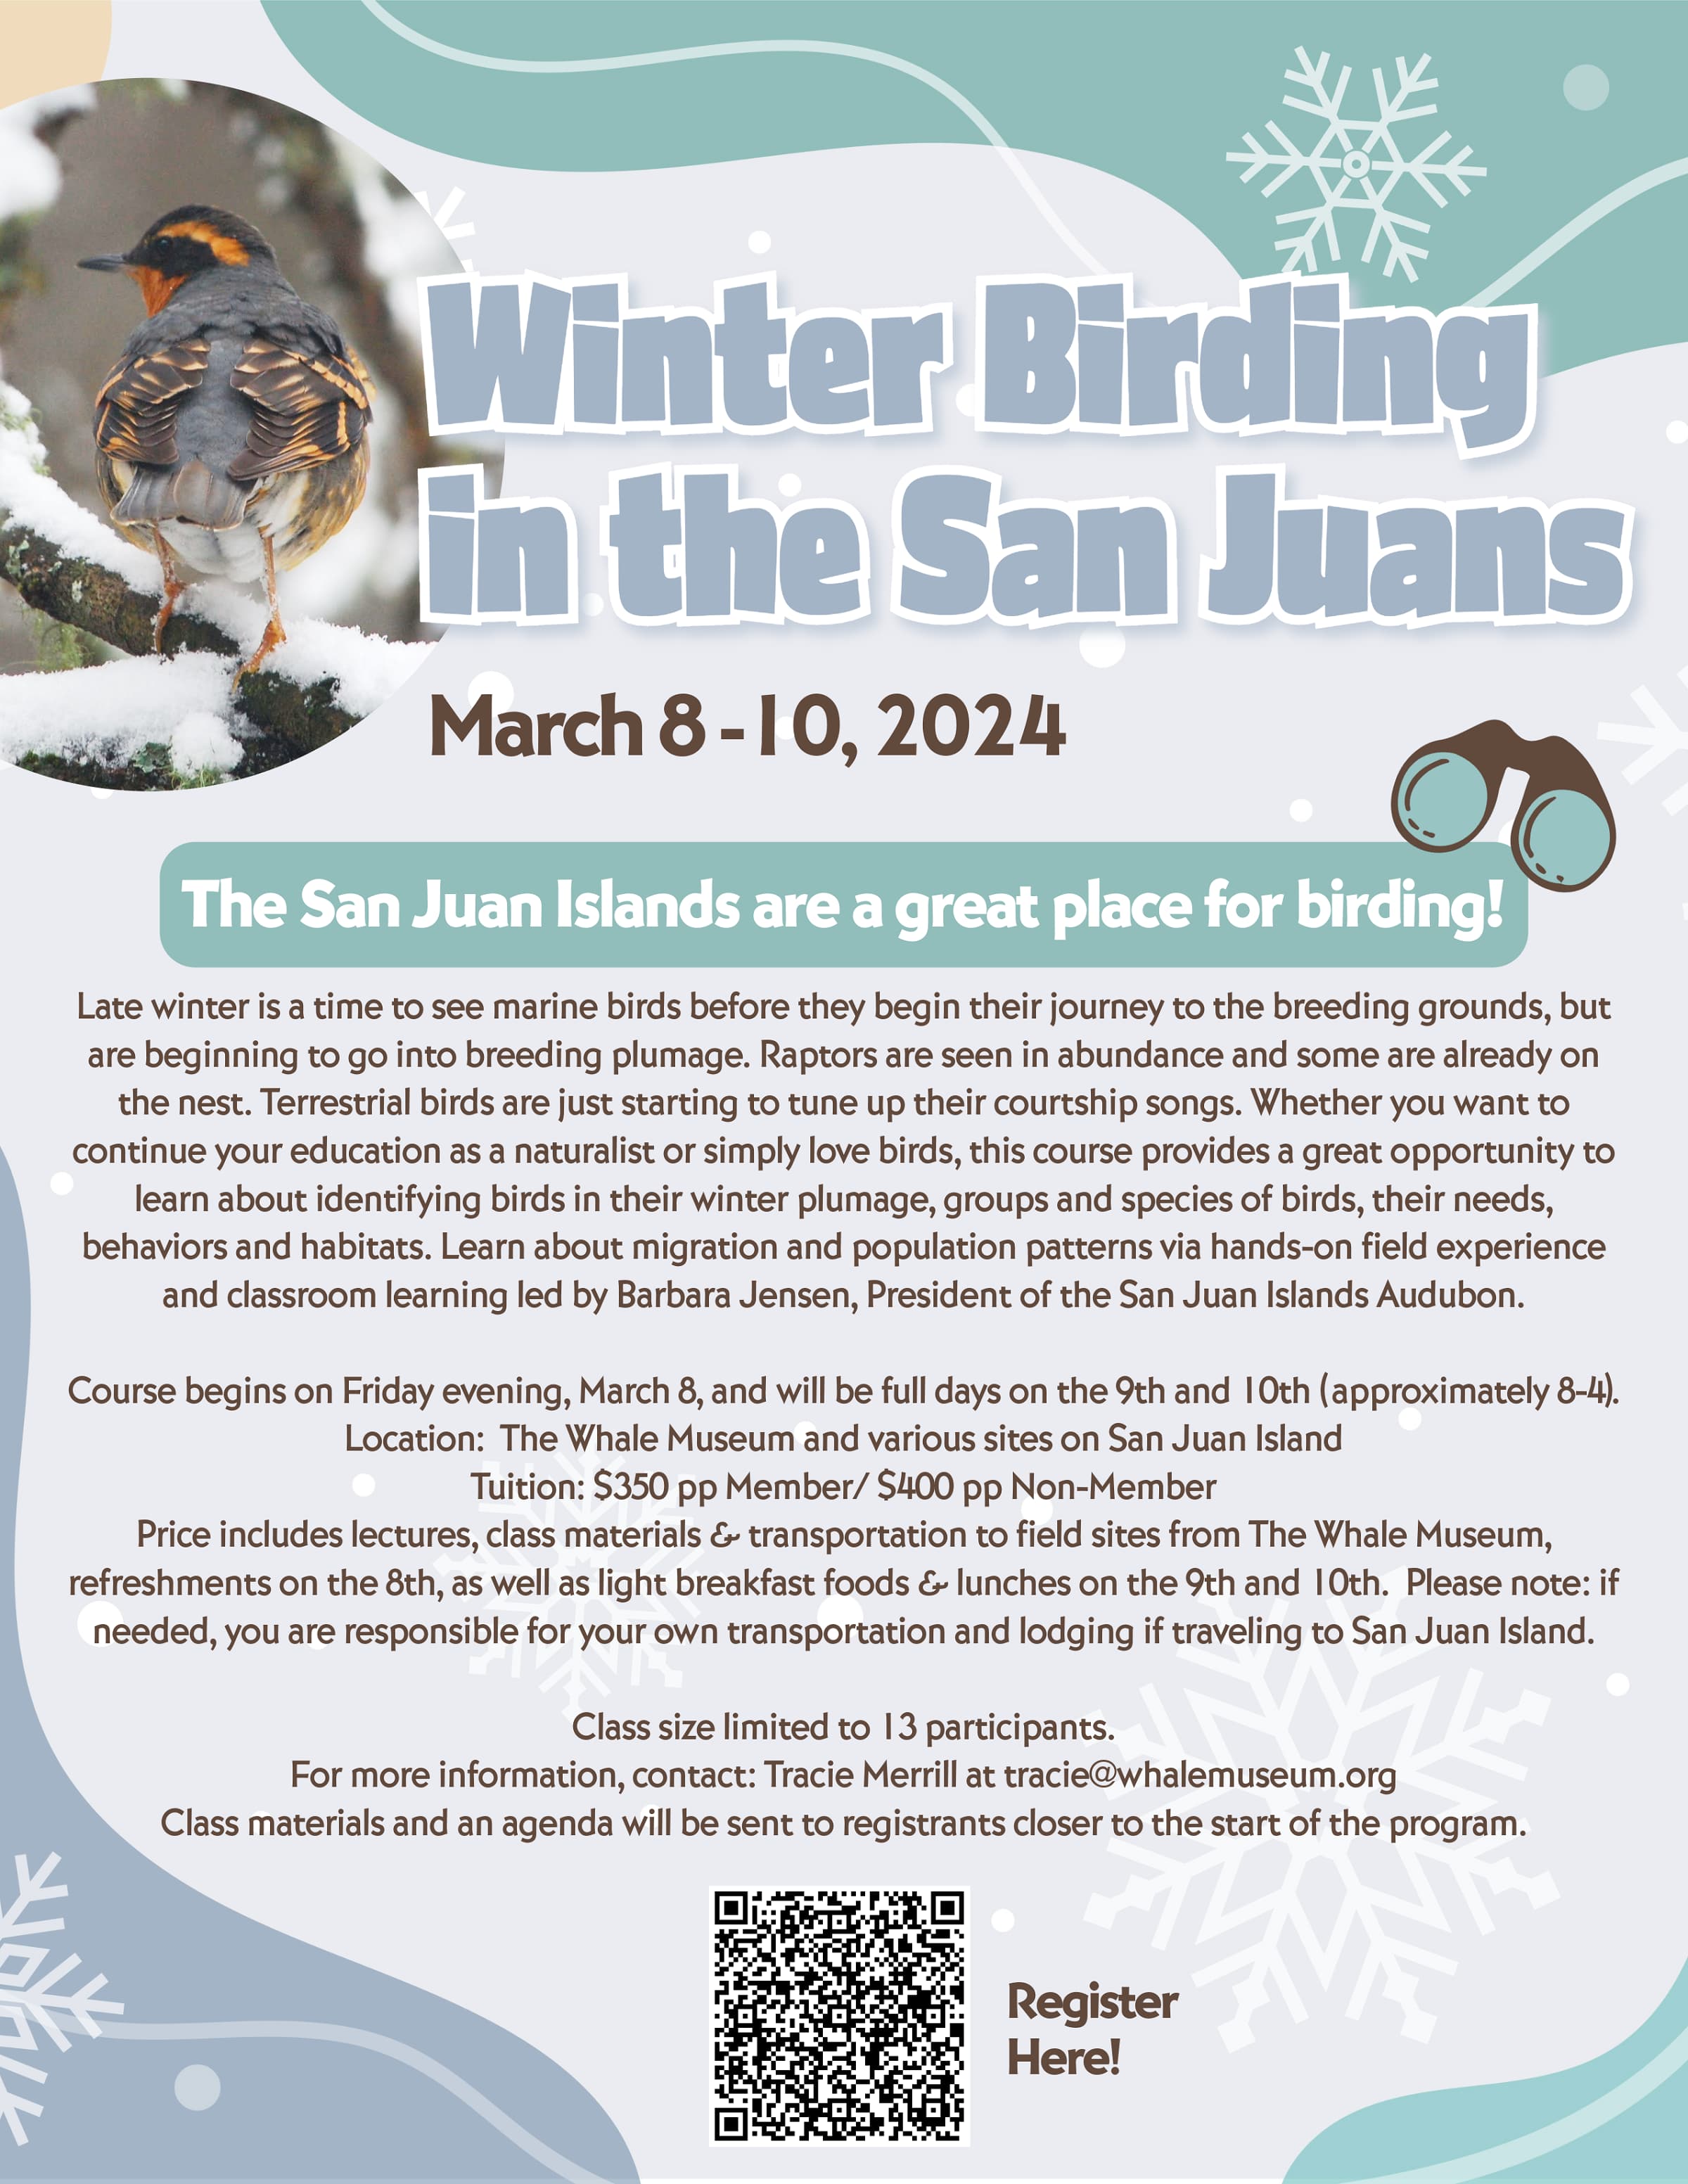 Graphic with a photo of a bird on the left and bold blue text that reads, "Winter Birding in the San Juans. March 8–10, 2024." Underneath is more text that says, "The San Juan Islands are a great place for birding! Late winter is a time to see marine birds before they begin their journey to the breeding grounds, but are beginning to go into breeding plumage. Raptors are seen in abundance and some are already on the nest. Terrestrial birds are just starting to tune up their courtship songs. Whether you want to continue your education as a naturalist or simply love birds, this course provides a great opportunity to learn about identifying birds in their winter plumage, groups and species of birds, their needs, behaviors and habitats. Learn about migration and population patterns via hands-on field experience and classroom learning led by Barbara Jensen, President of the San Juan Islands Audubon. Course begins on Friday evening, March 8, and will be full days on the 9th and 10th (approximately 8-4). Location: The Whale Museum and various sites on San Juan Island. Tuition: $350 pp Member / $400 pp Non-Member. Price includes lectures, class materials and transportation to field sites from The Whale Museum, refreshments on the 8th, as well as light breakfast foods and lunches on the 9th and 10th. Please note: if needed, you are responsible for your own transportation and lodging if traveling to San Juan Island. Class size limited to 13 participants. For more information, contact: Tracie Merrill at tracie@whalemuseum.org. Class materials and an agenda will be sent to registrants closer to the start of the program." QR code at the bottom and next to it it says "register here"